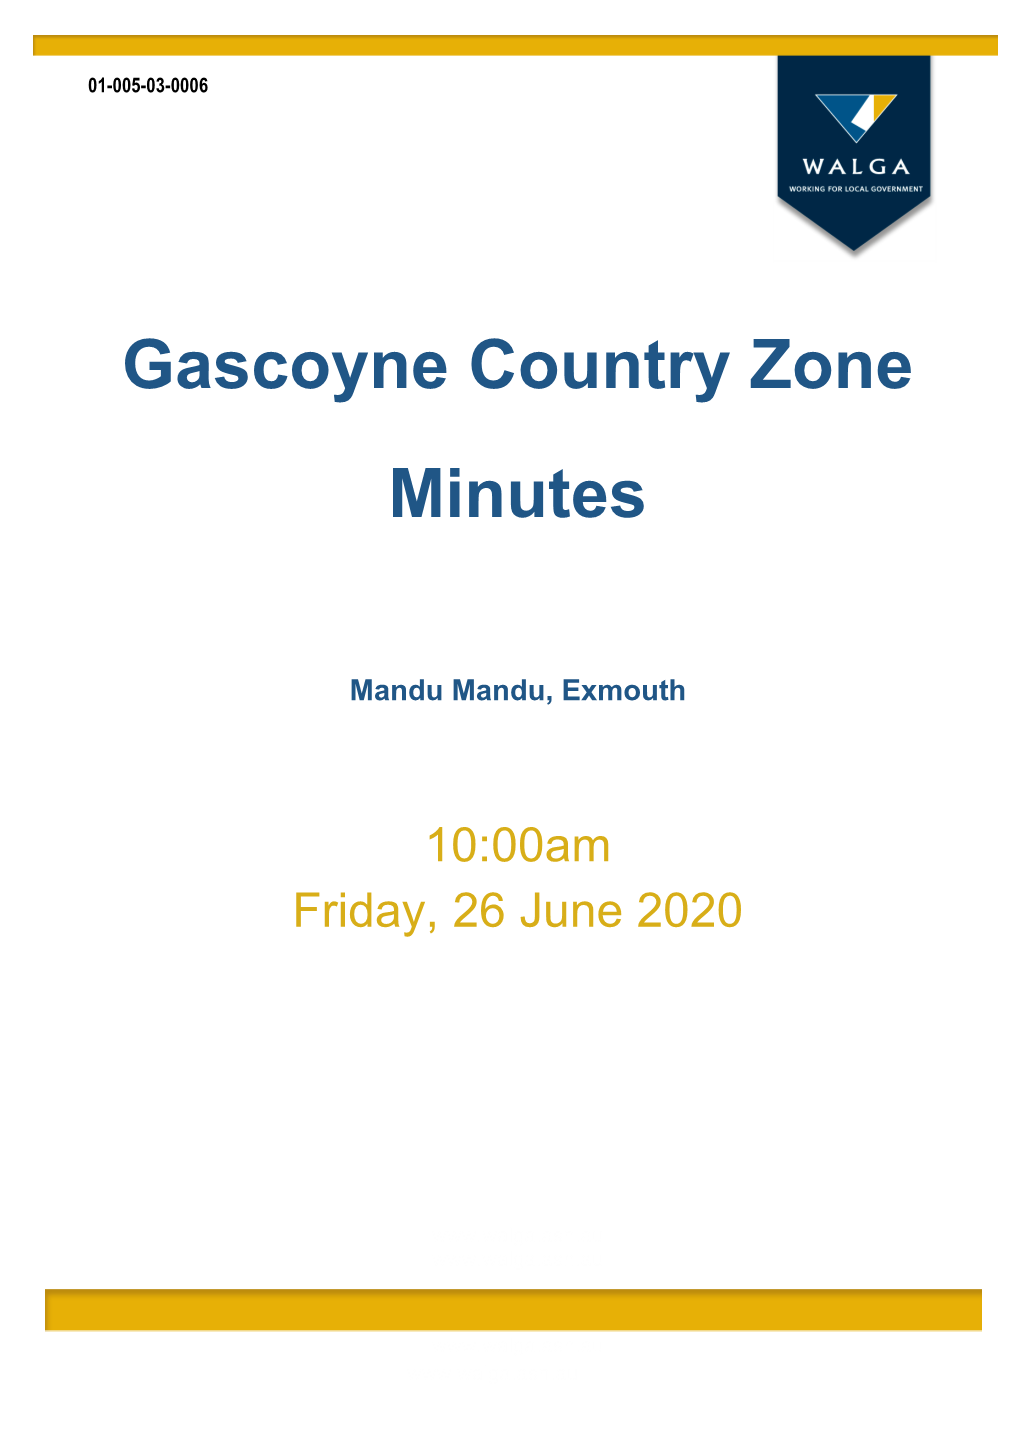 Gascoyne Country Zone Minutes